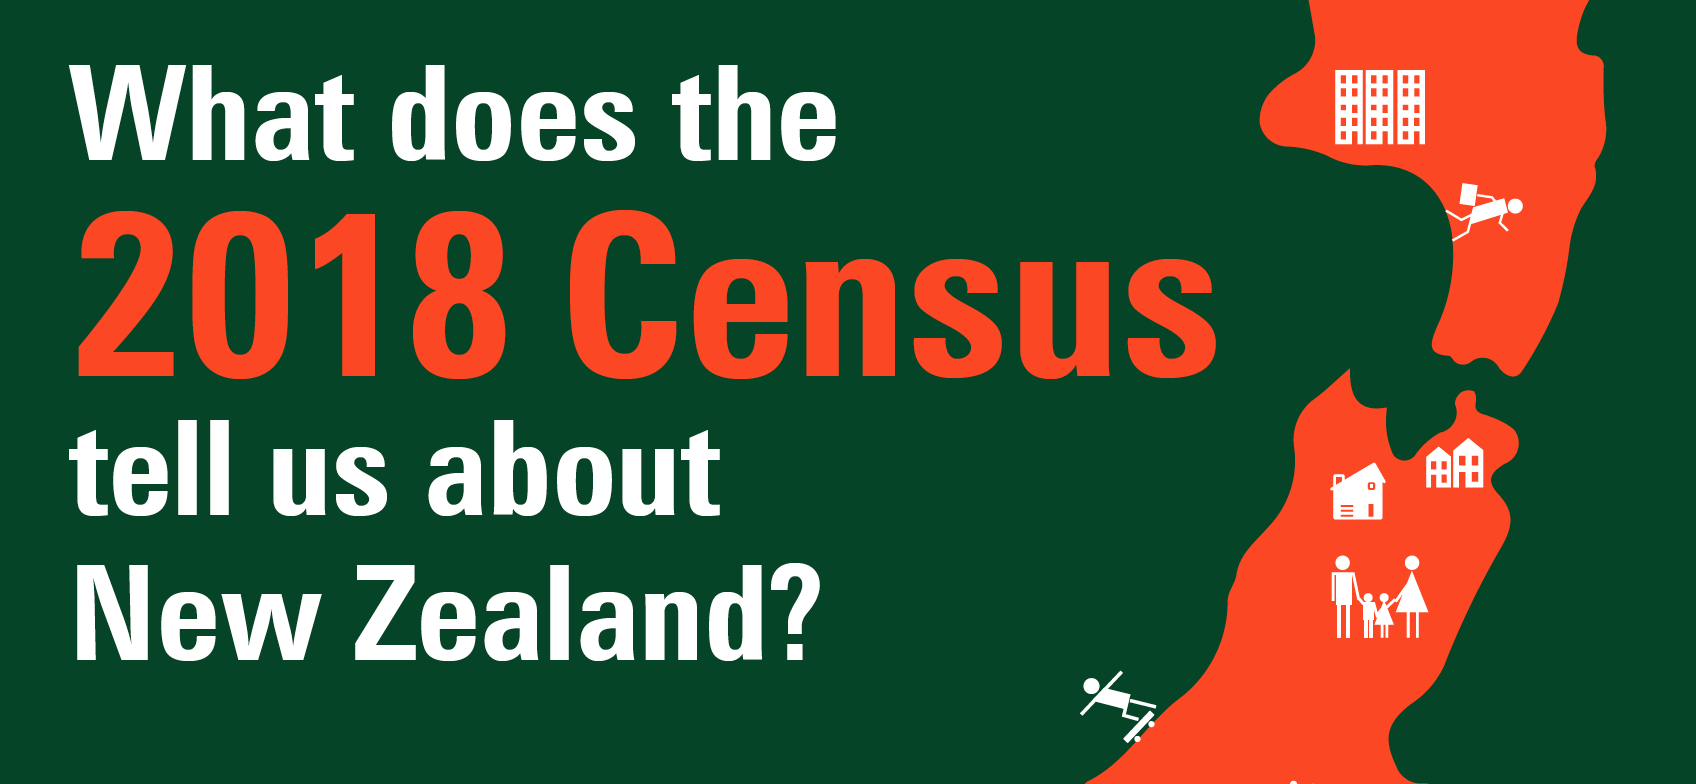 What does the 2018 Census tell us about New Zealand?